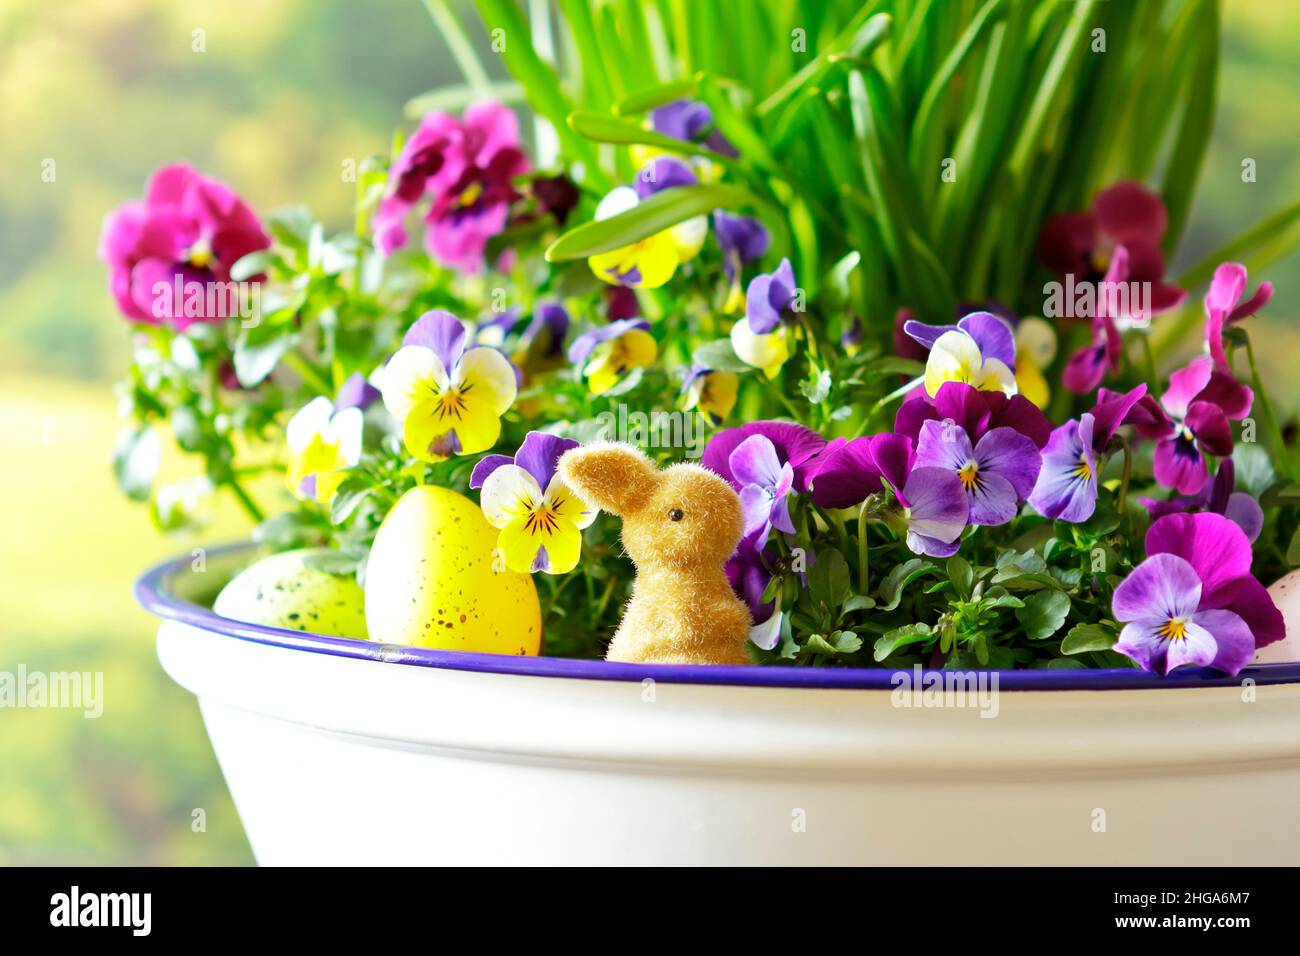 Closeup of a Happy Easter decoration with a little bunny, colored eggs and very colorful pansy flowers in full bloom. Stock Photo